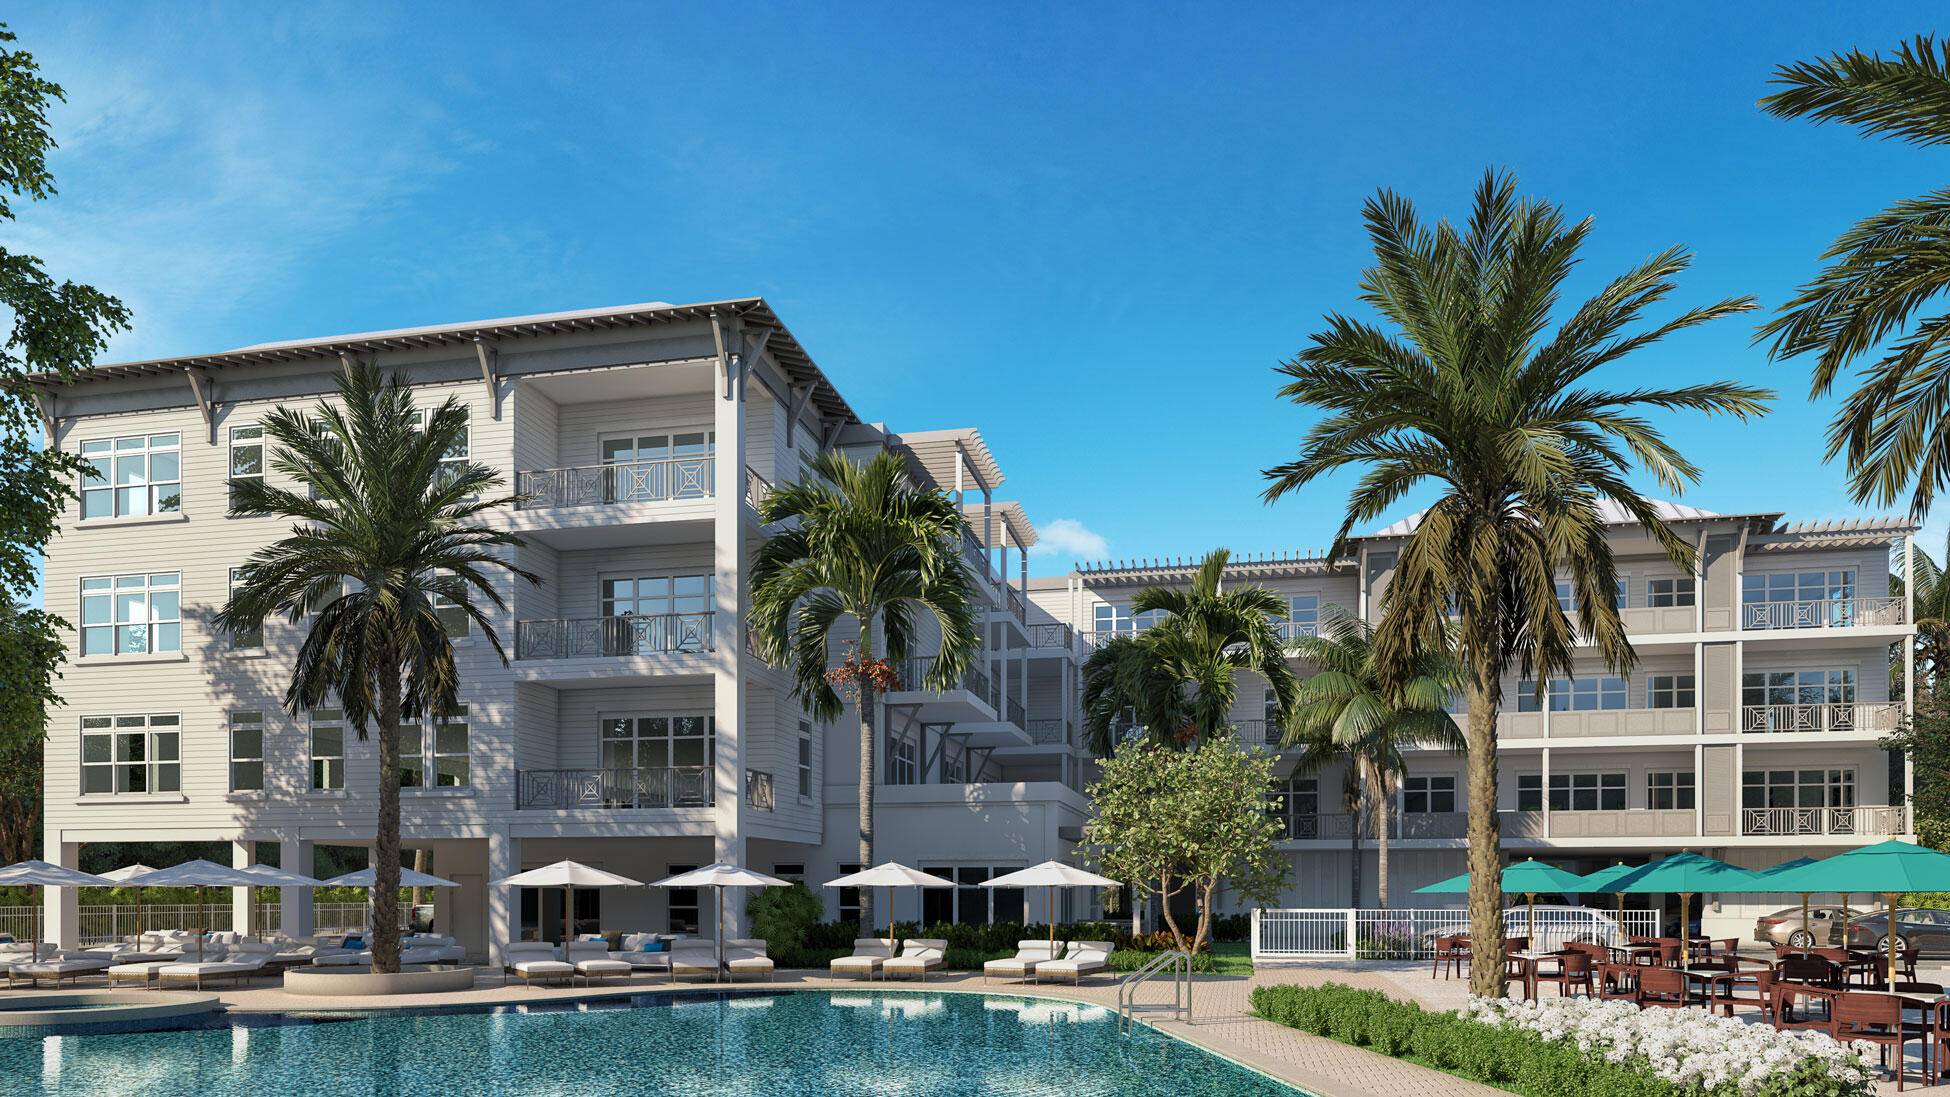 Come home to Sailfish Cove, the most exclusive new ocean access condominium in the heart of Stuart, FL.